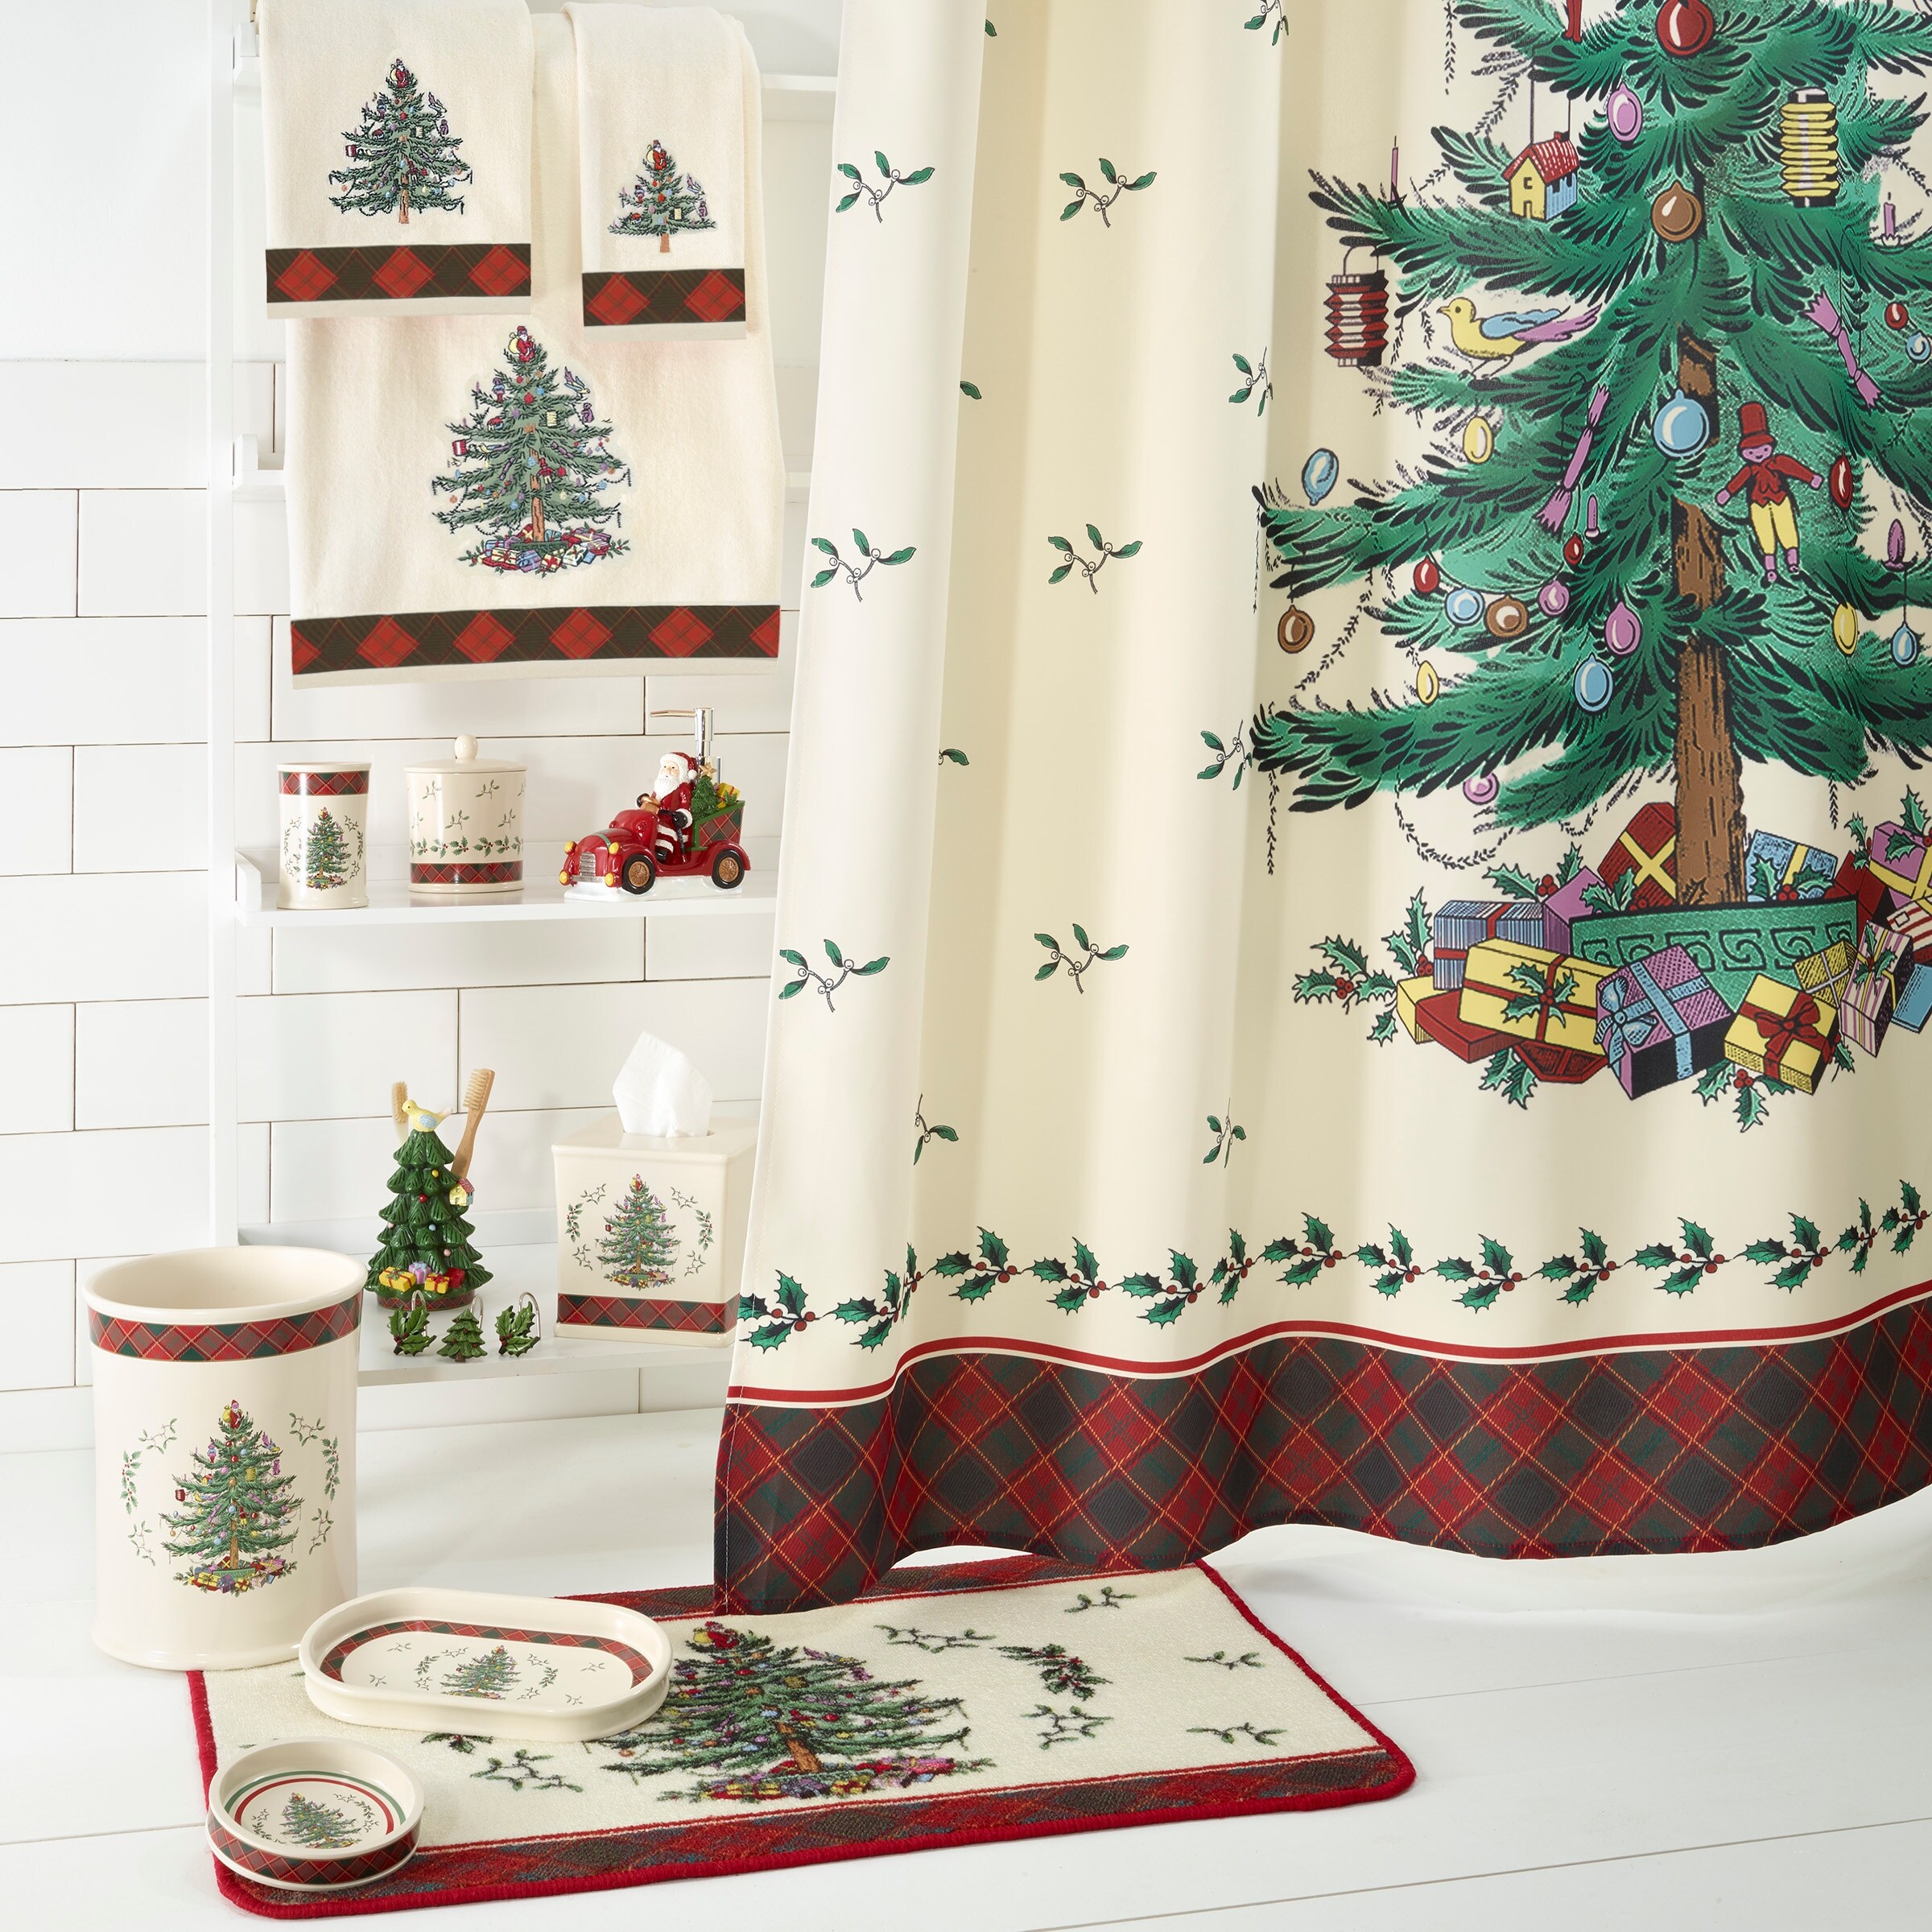 Christmas Tree Set of 3 Kitchen Towels (Green)